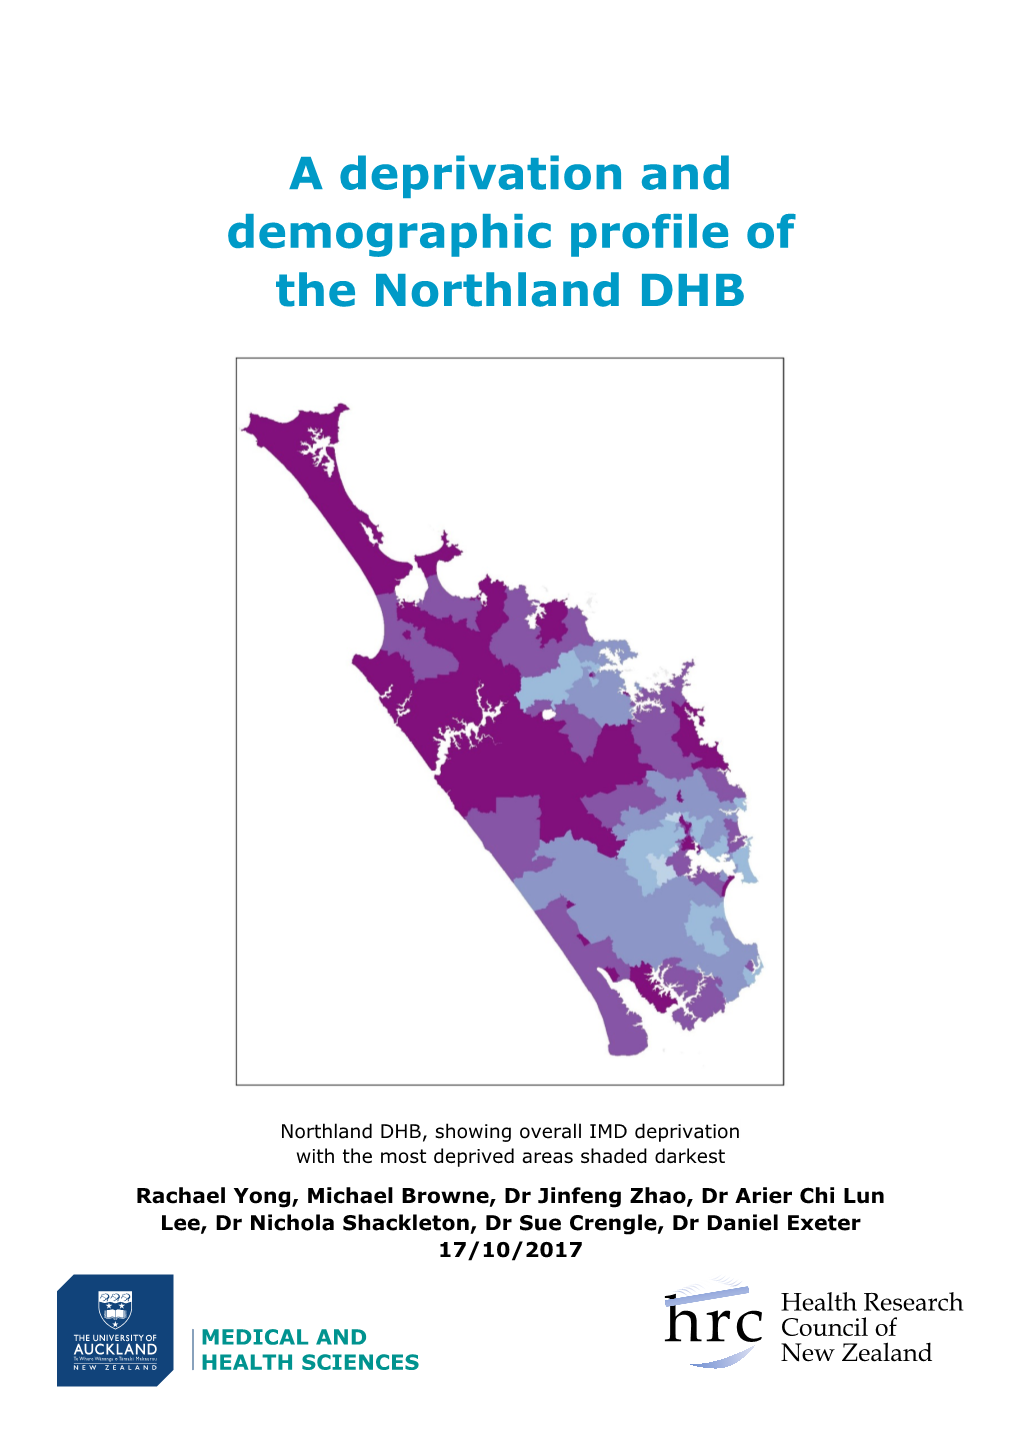 A Deprivation and Demographic Profile of the Northland DHB